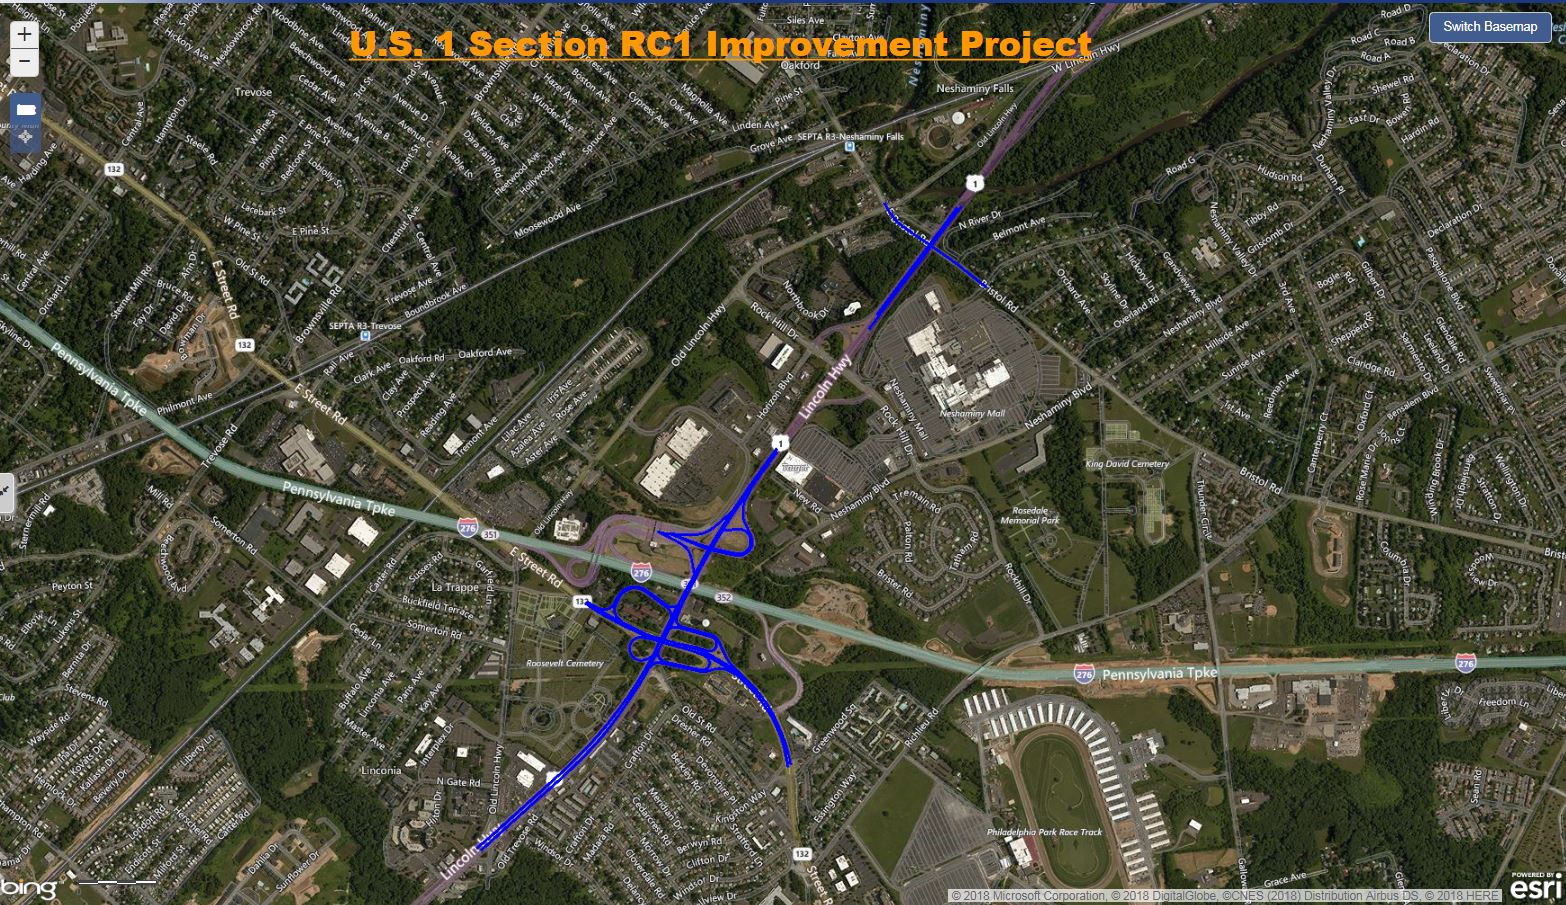 US 1 Section RC1 Project Limits.JPG